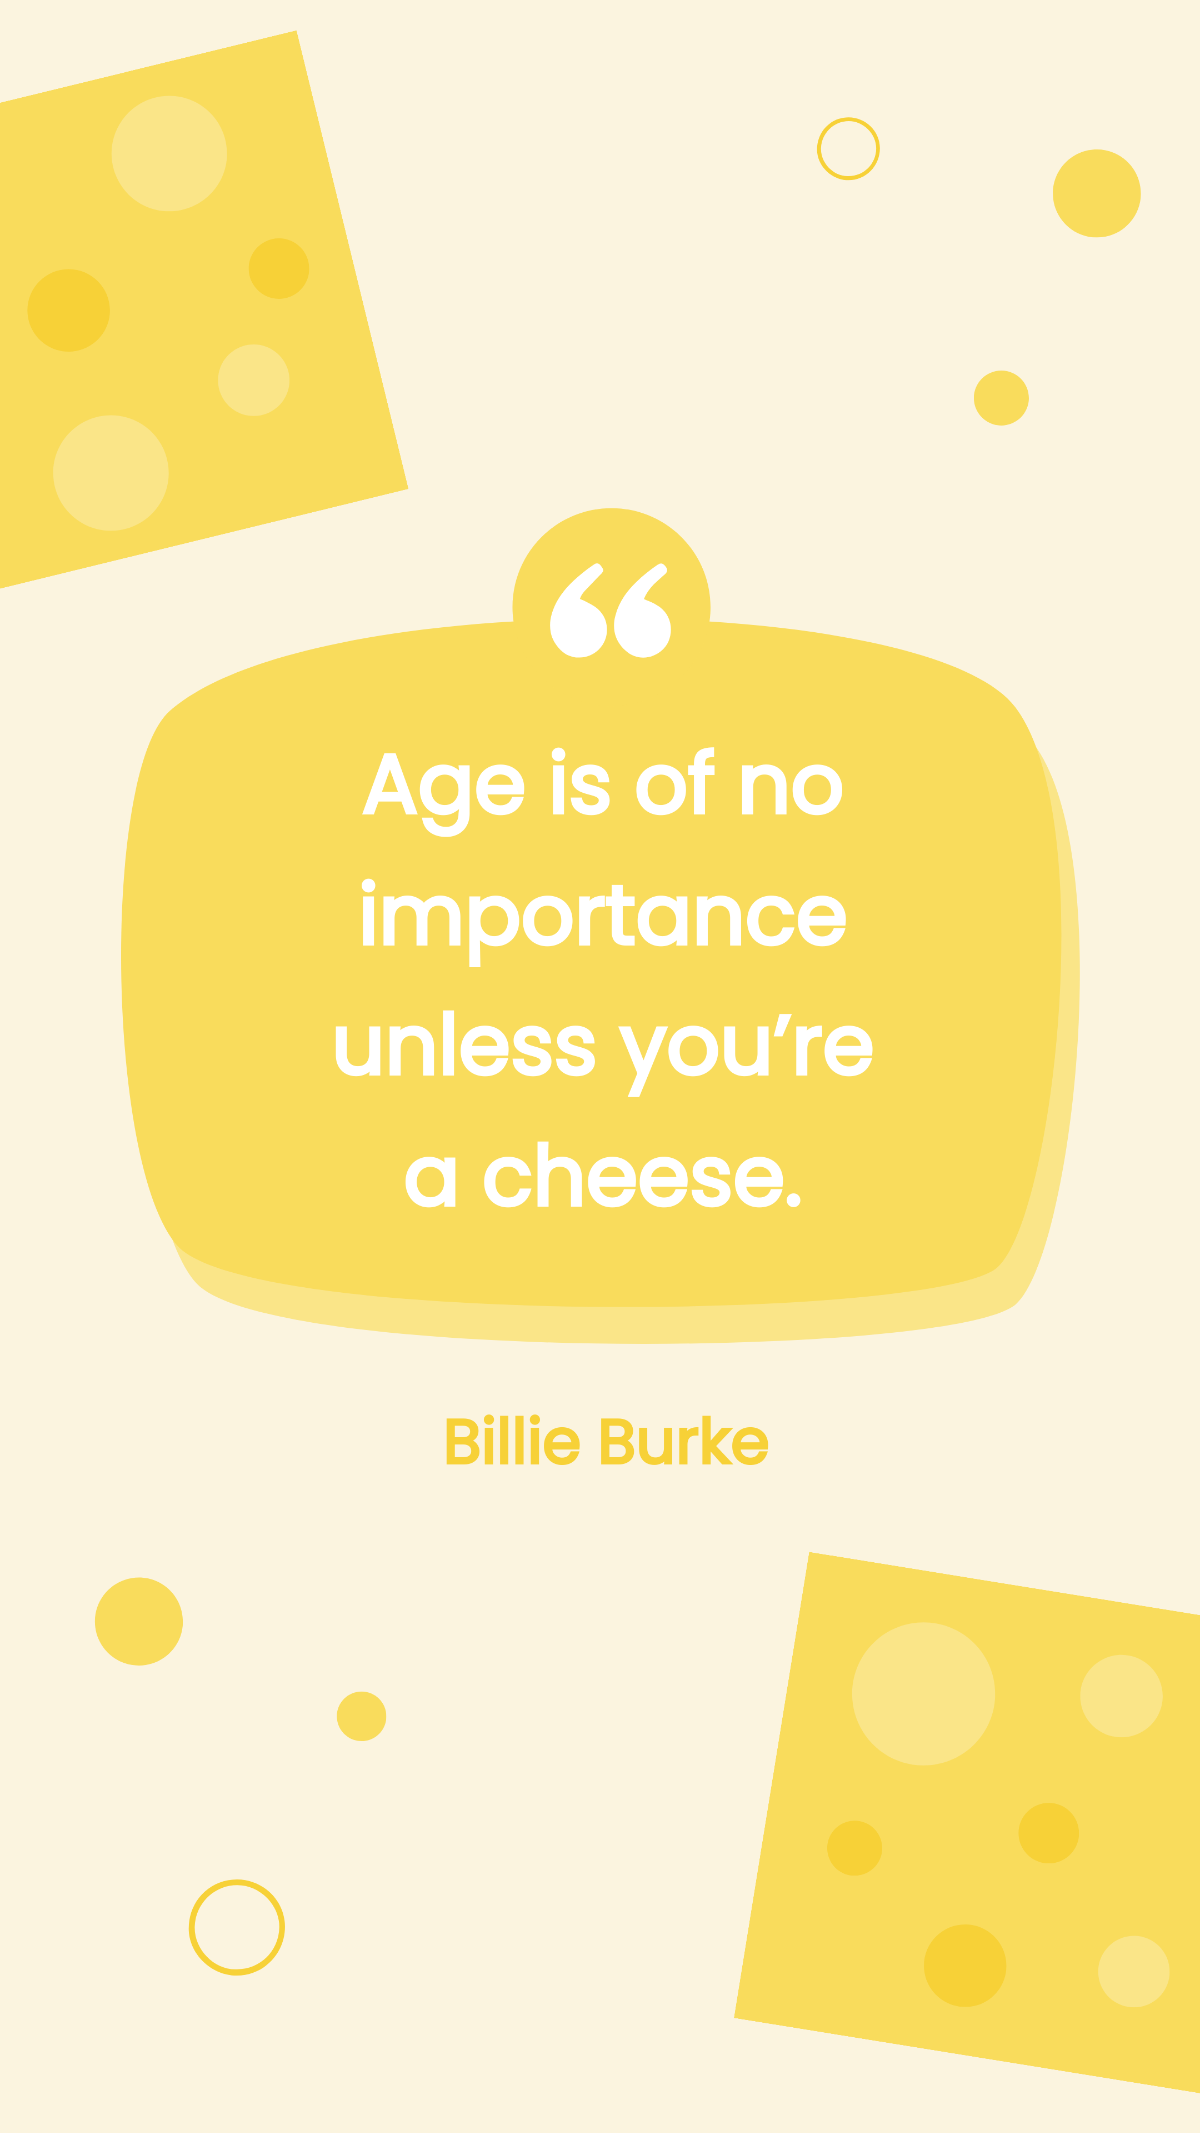 Billie Burke - Age is of no importance unless you’re a cheese. Template